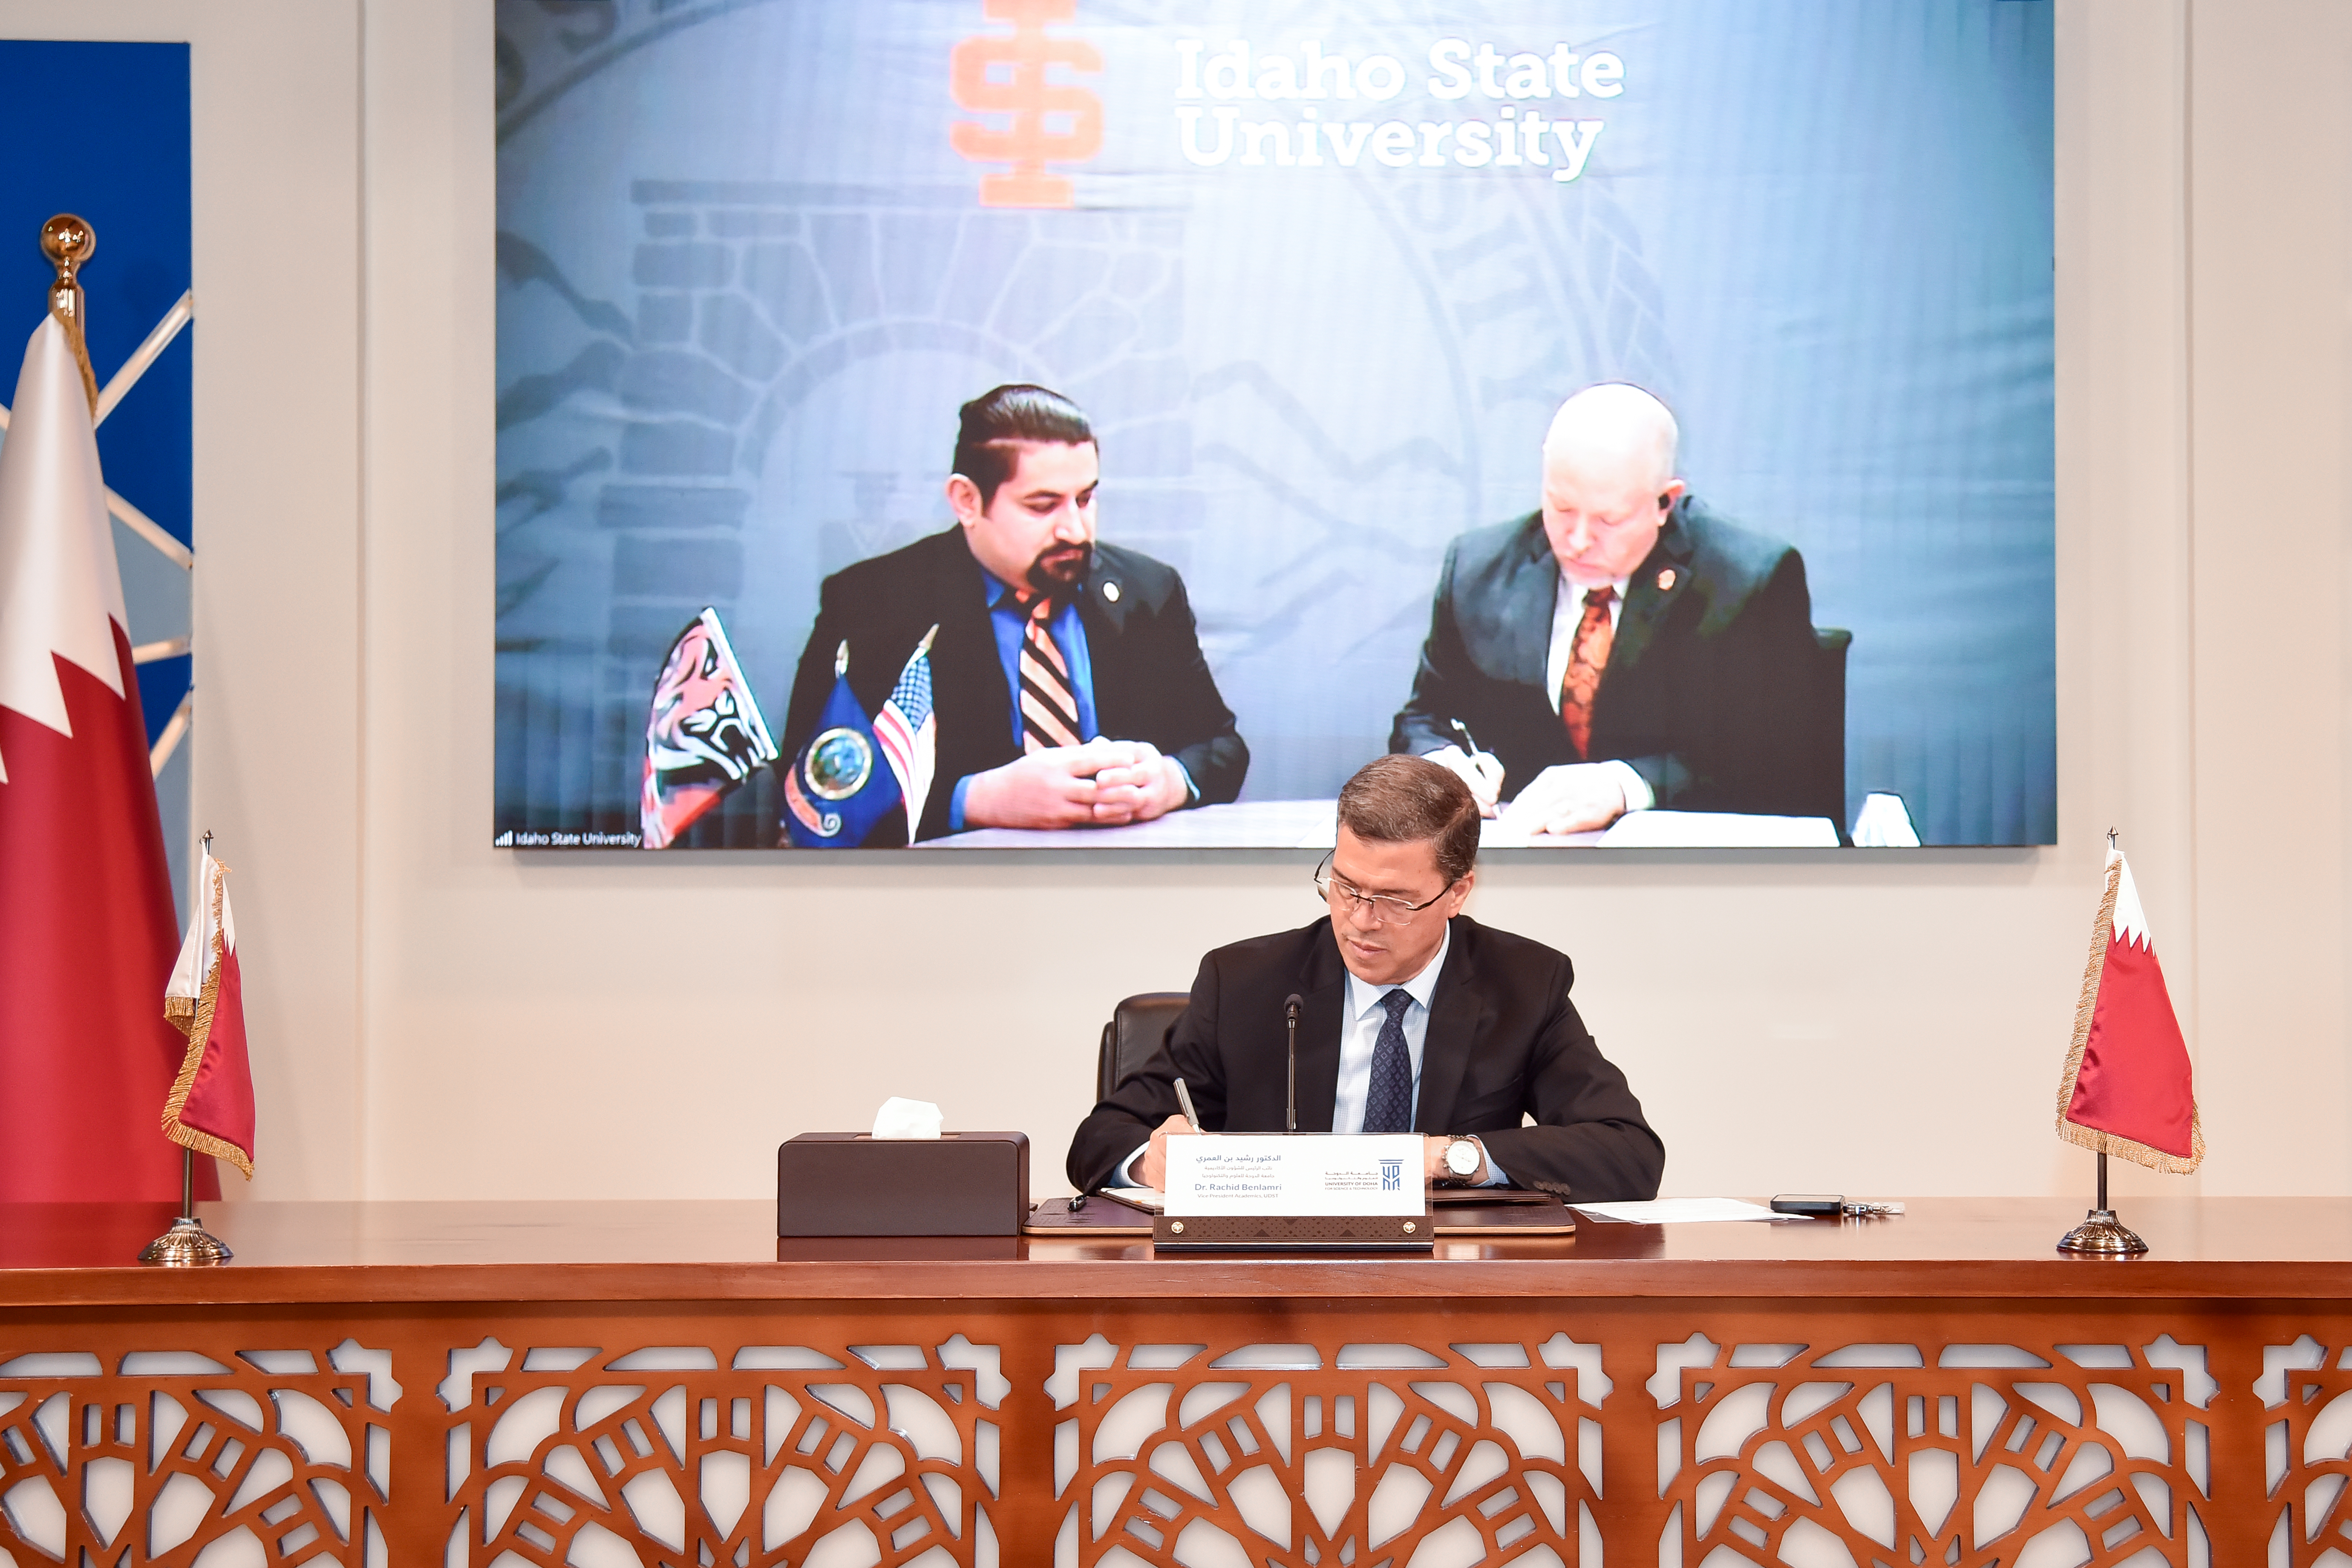 Representatives from ISU and UDST sign MOU via Zoom